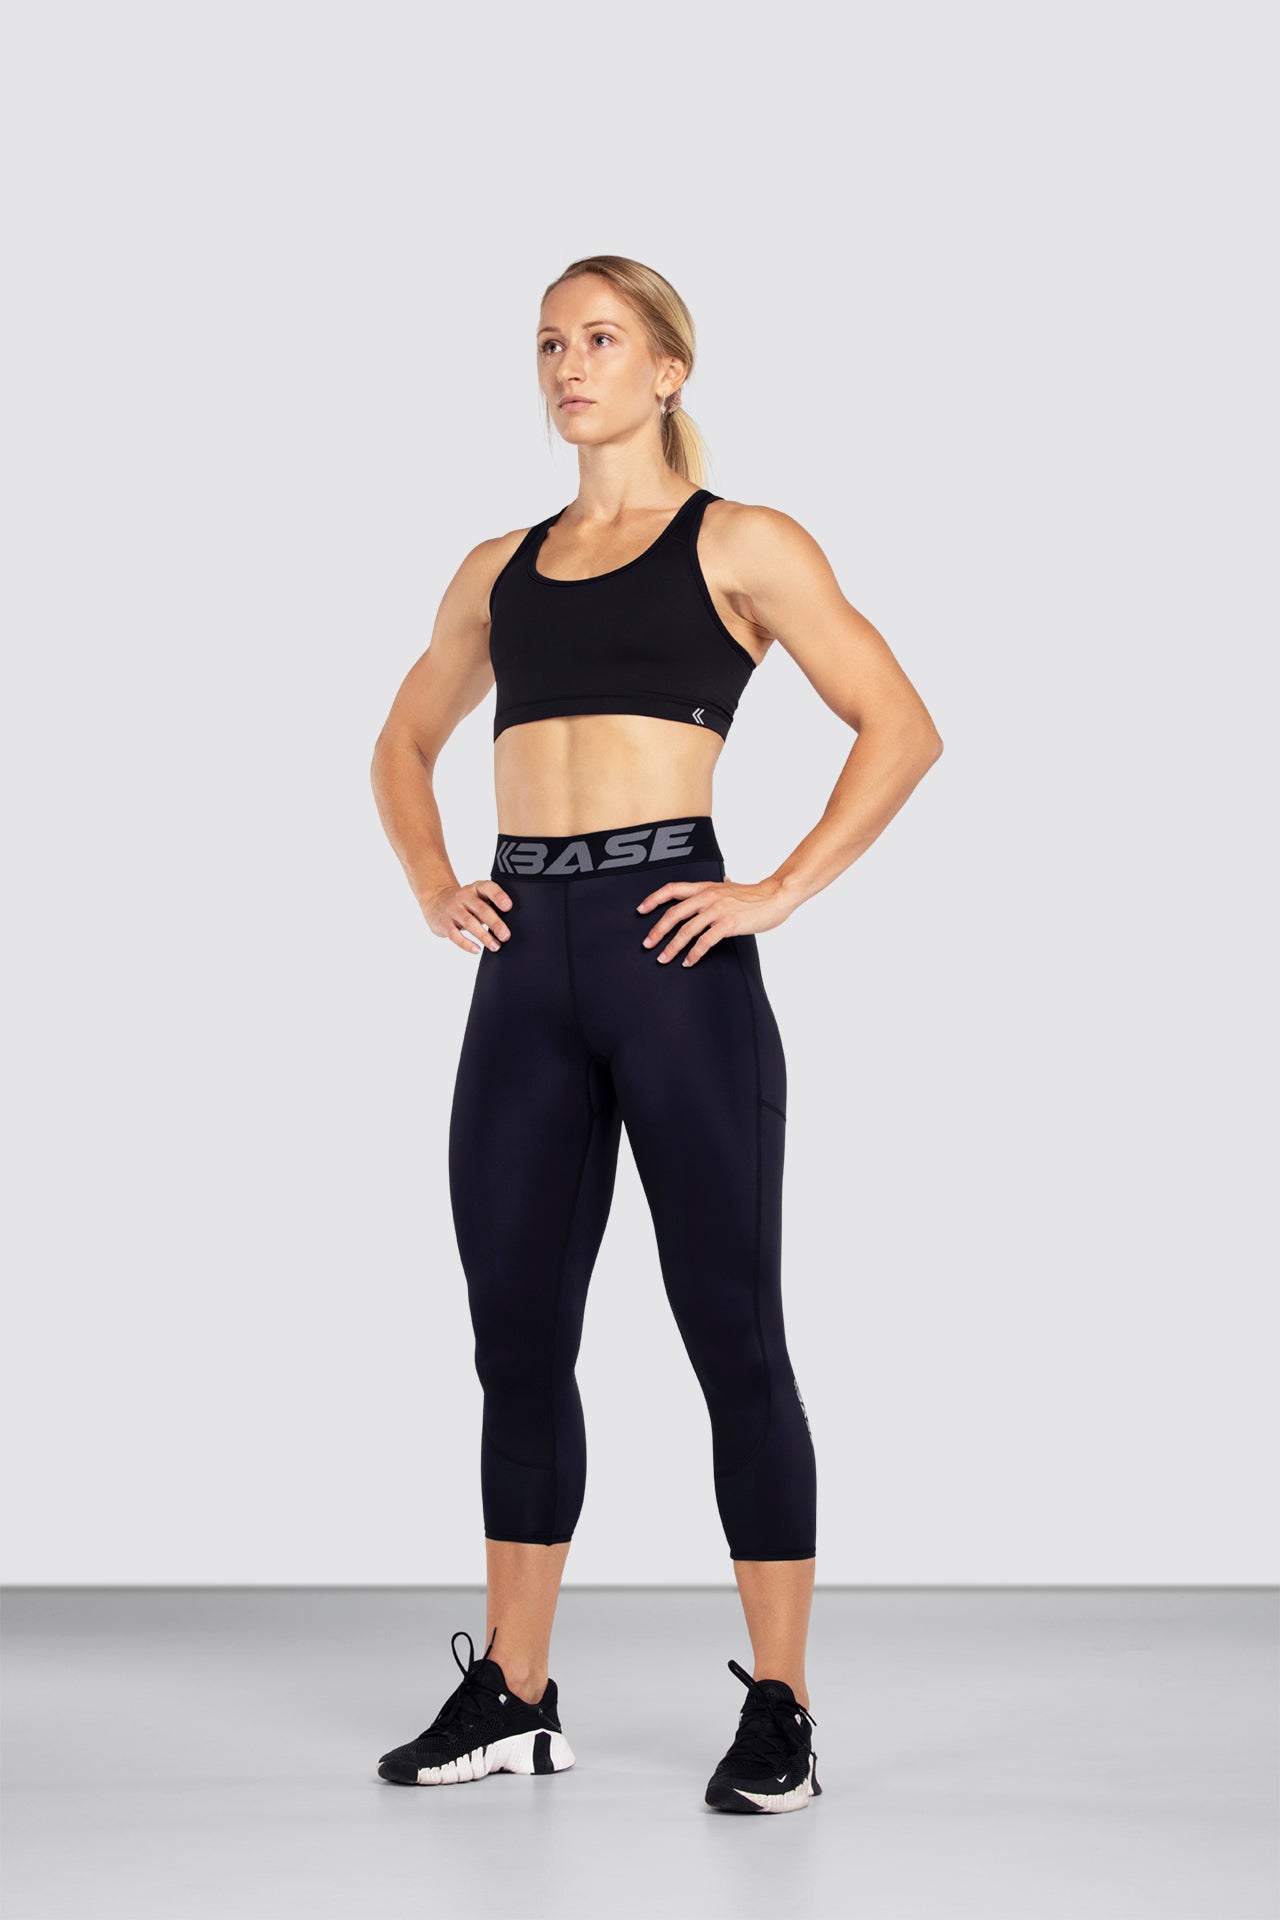 BASE Women's Eco 7/8 Tights – BASE Compression